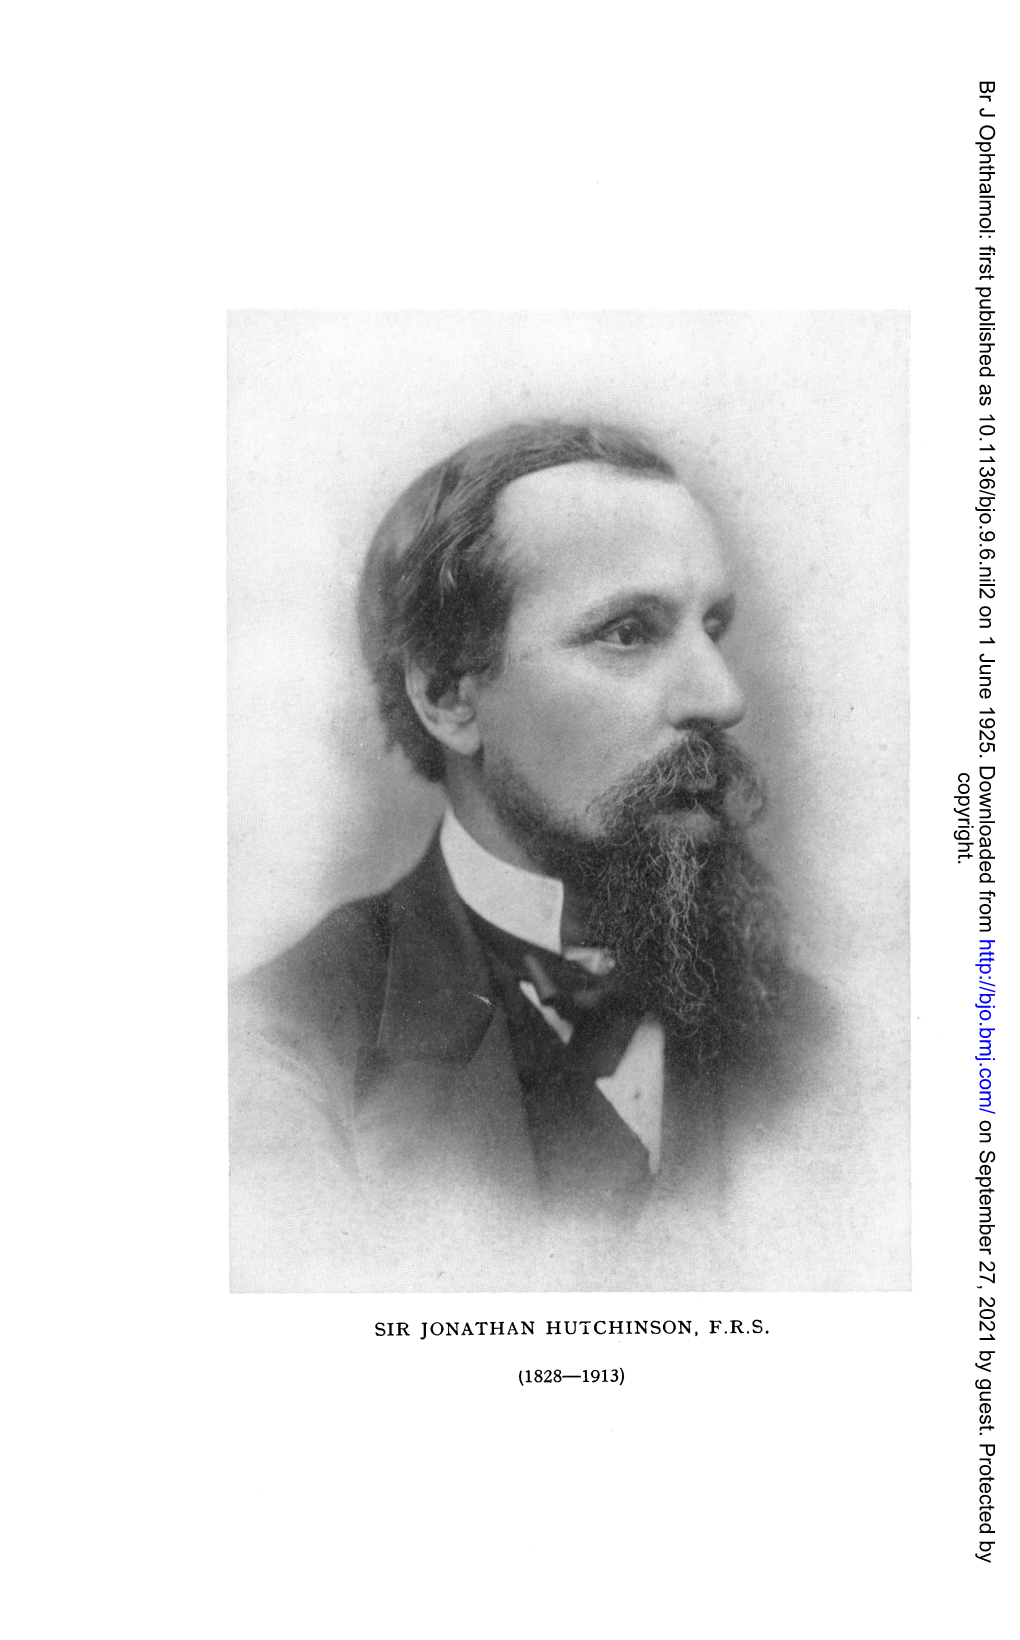 SIR JONATHAN Hutlchinson, F.R.S. (1828-1913) Br J Ophthalmol: First Published As 10.1136/Bjo.9.6.Nil2 on 1 June 1925